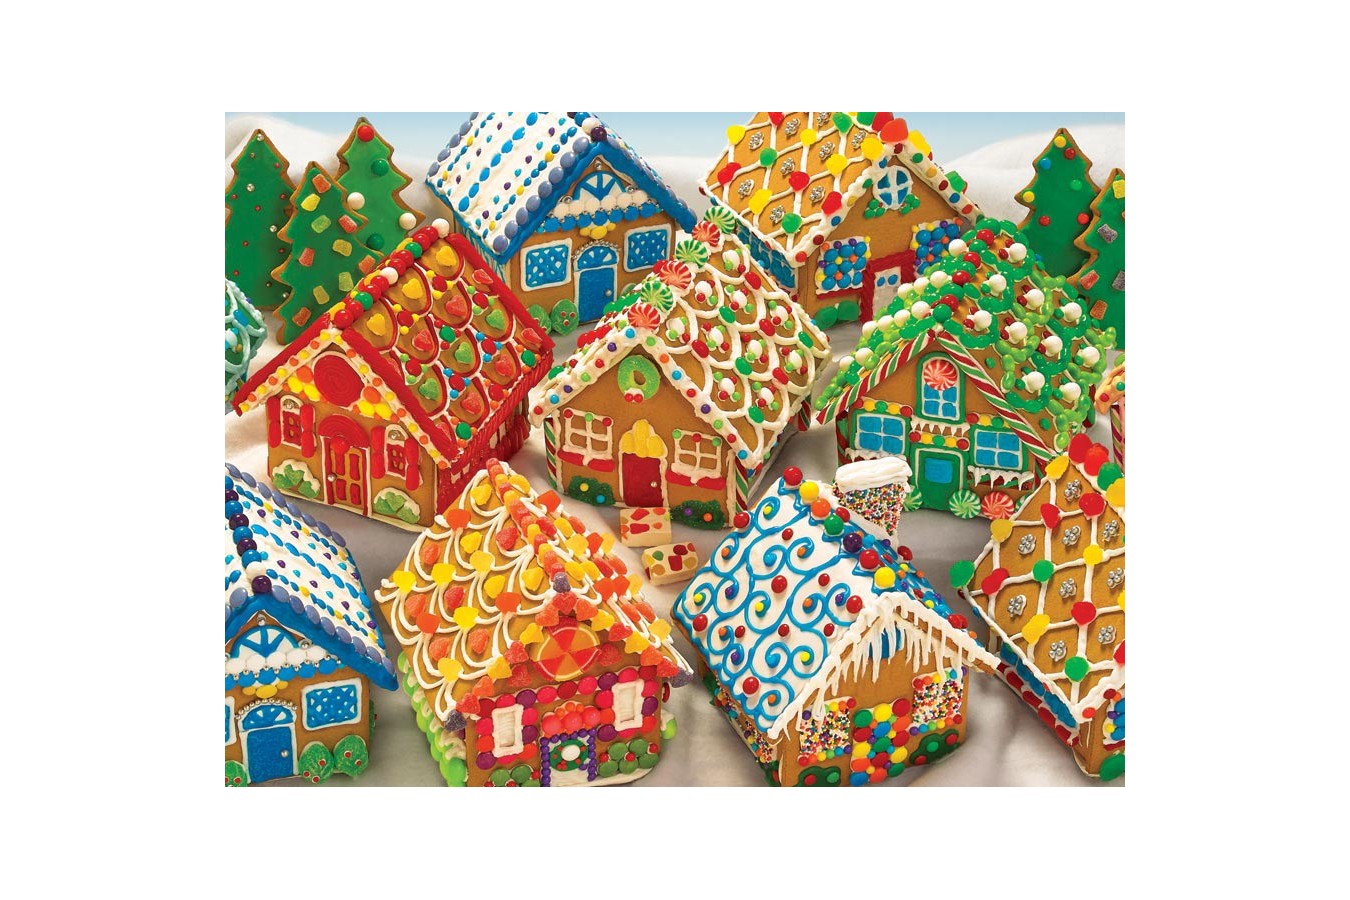 Puzzle Cobble Hill - Gingerbread Houses, 400 piese (44544)